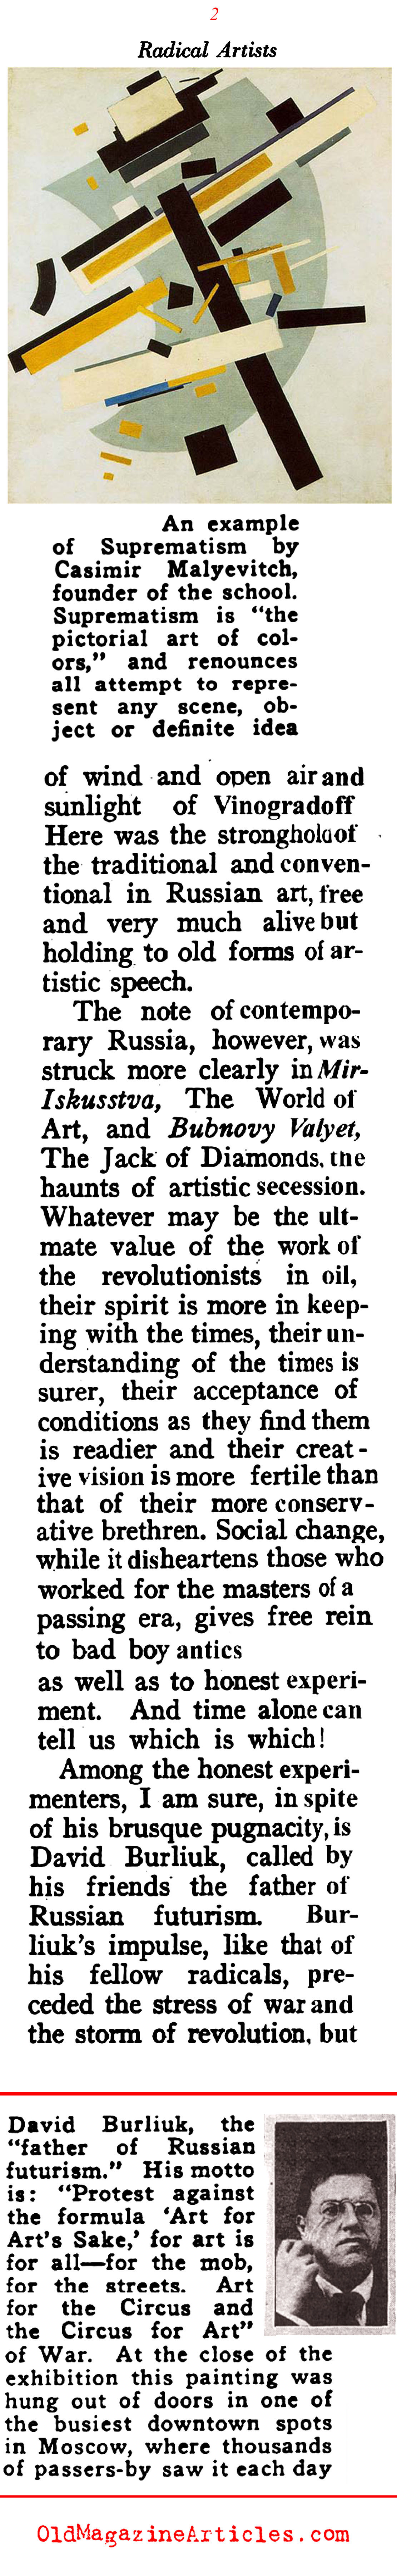 Russian Modernism After the Revolution (Vanity Fair, 1919)